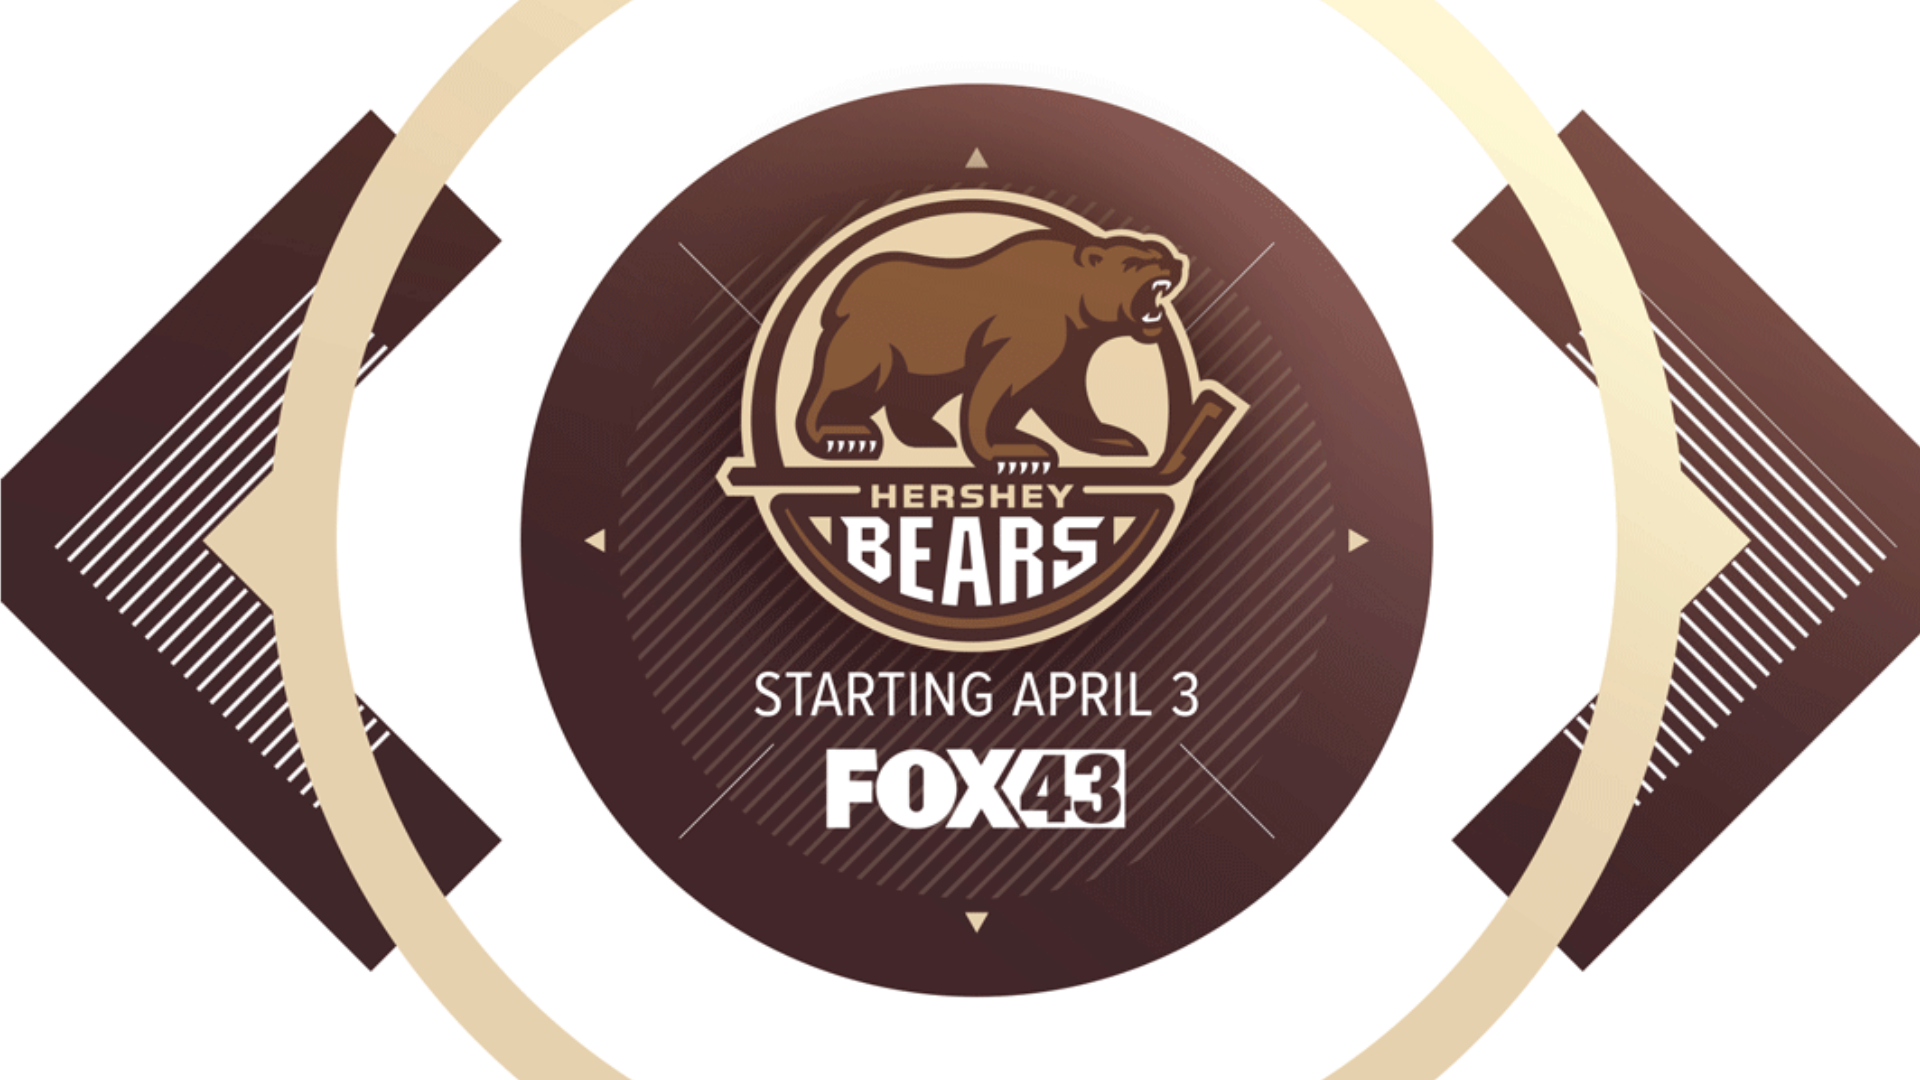 As the new television broadcast partner of the Hershey Bears, we will air six of the team's home games in April and May.